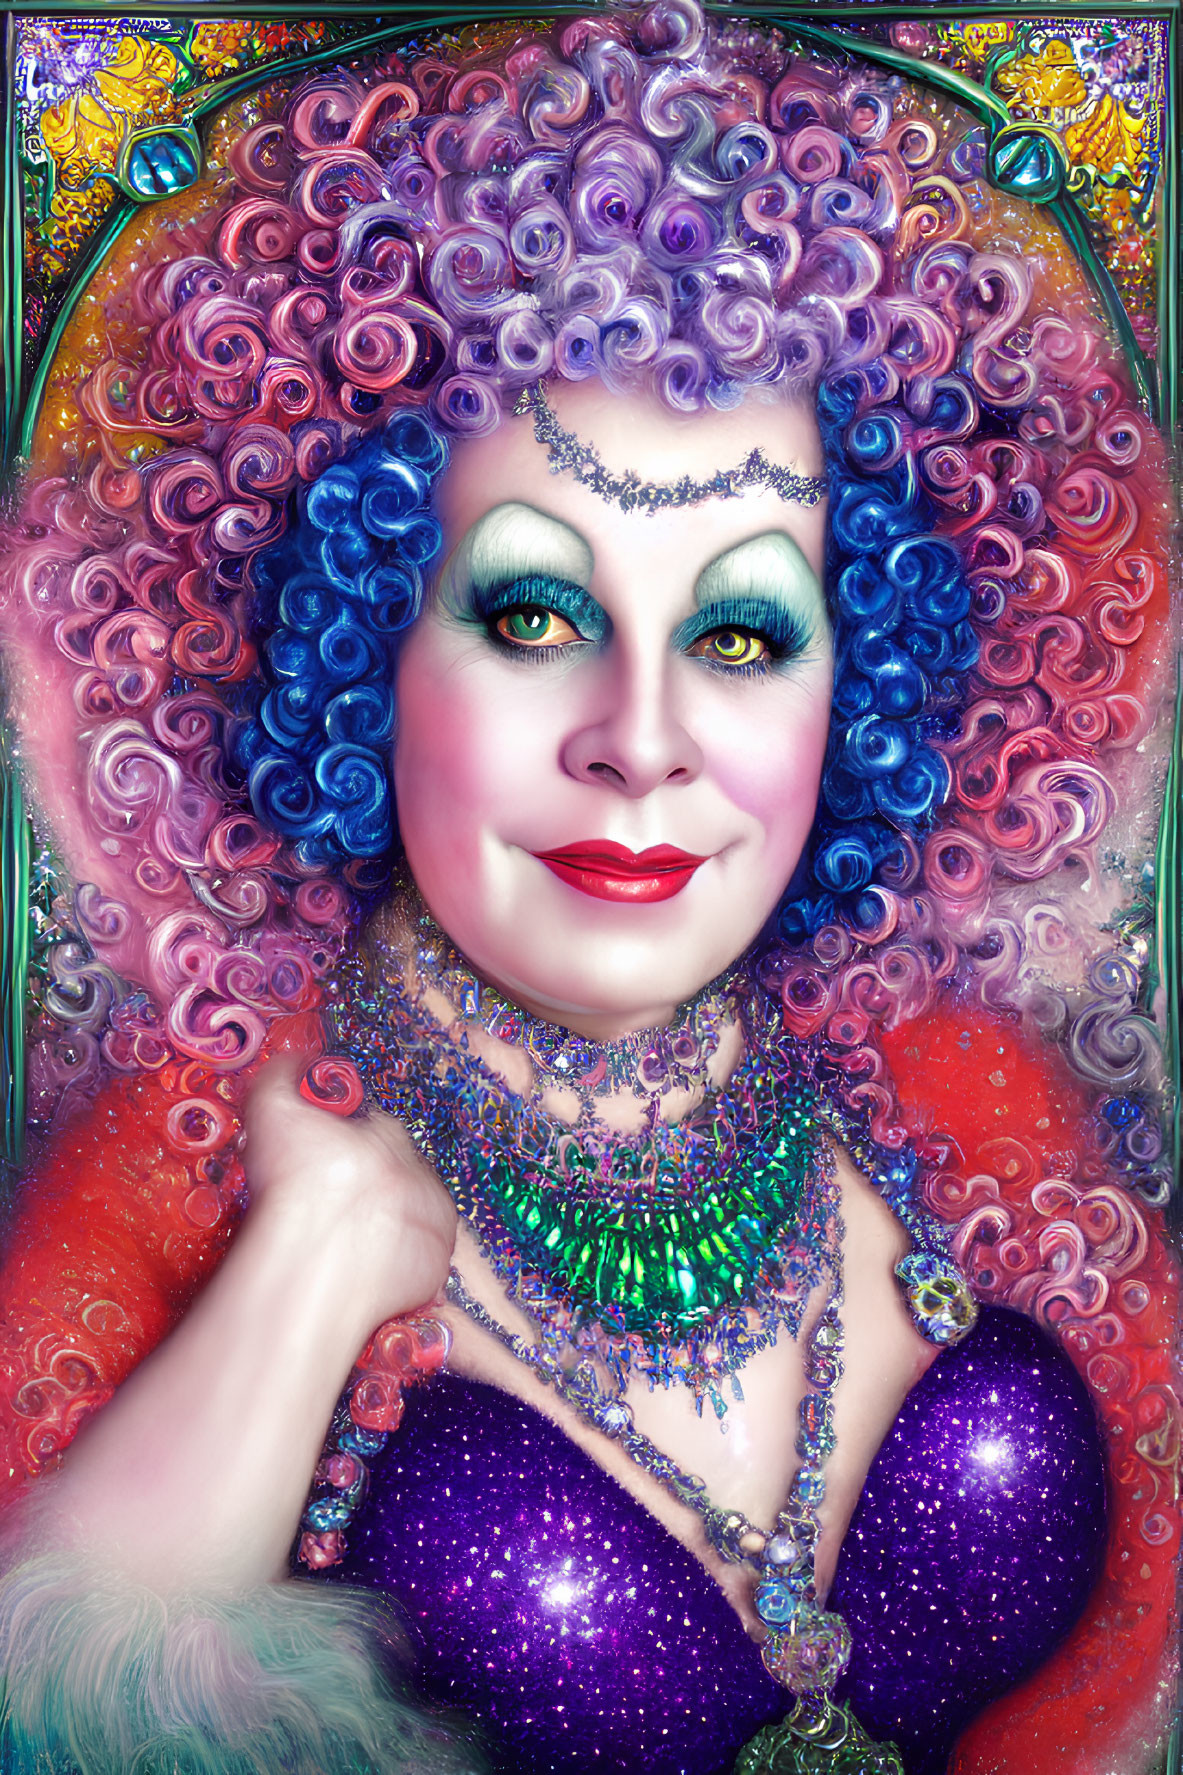 Colorful illustration of woman with curly purple & blue hair, green eyes, ornate jewelry, spark